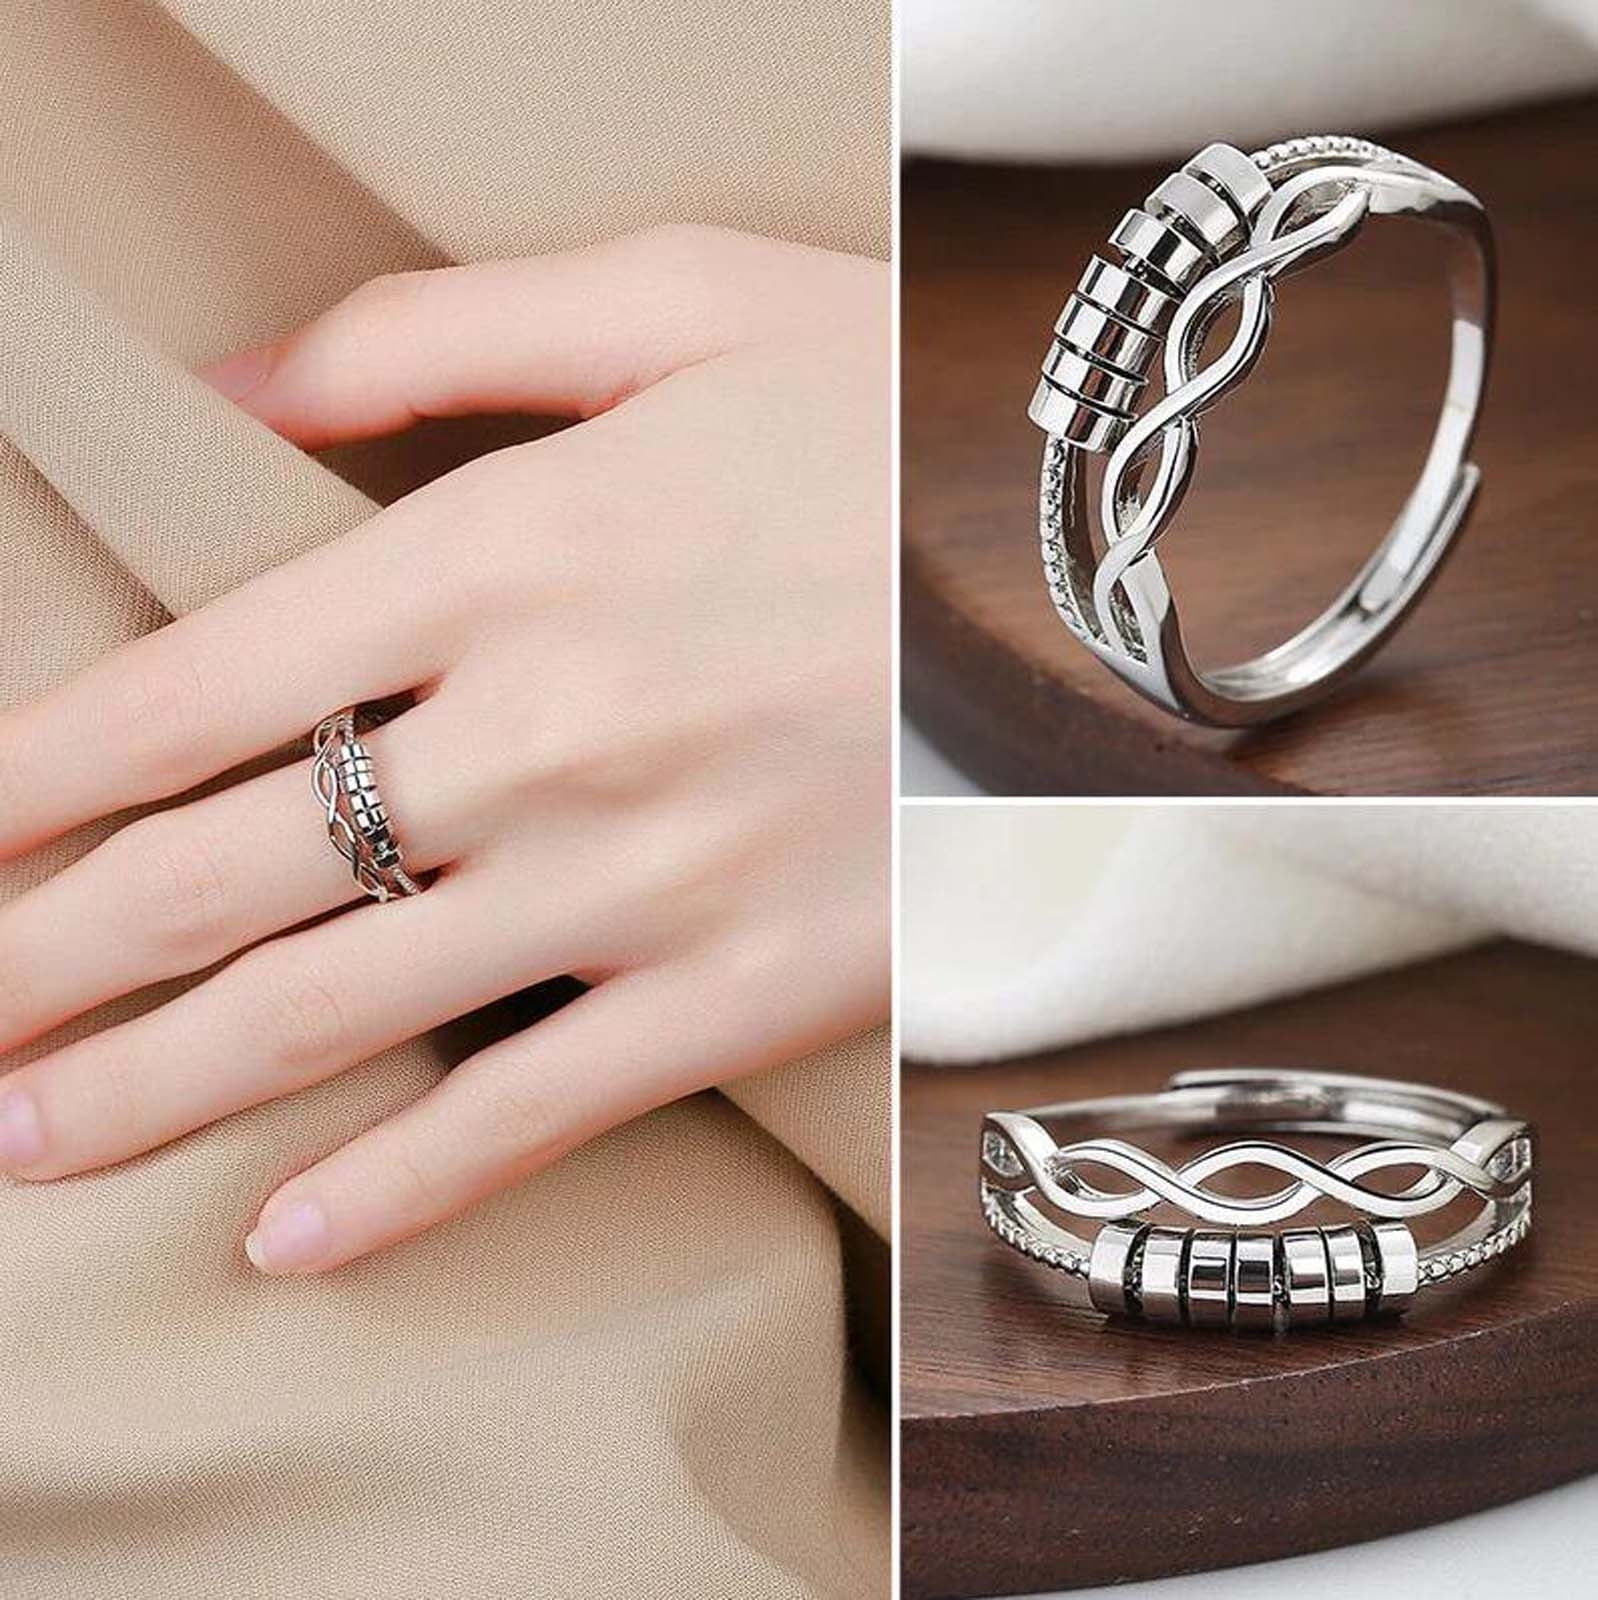 Buy Consecrated Silver Ring Online at Best Price | Isha Life